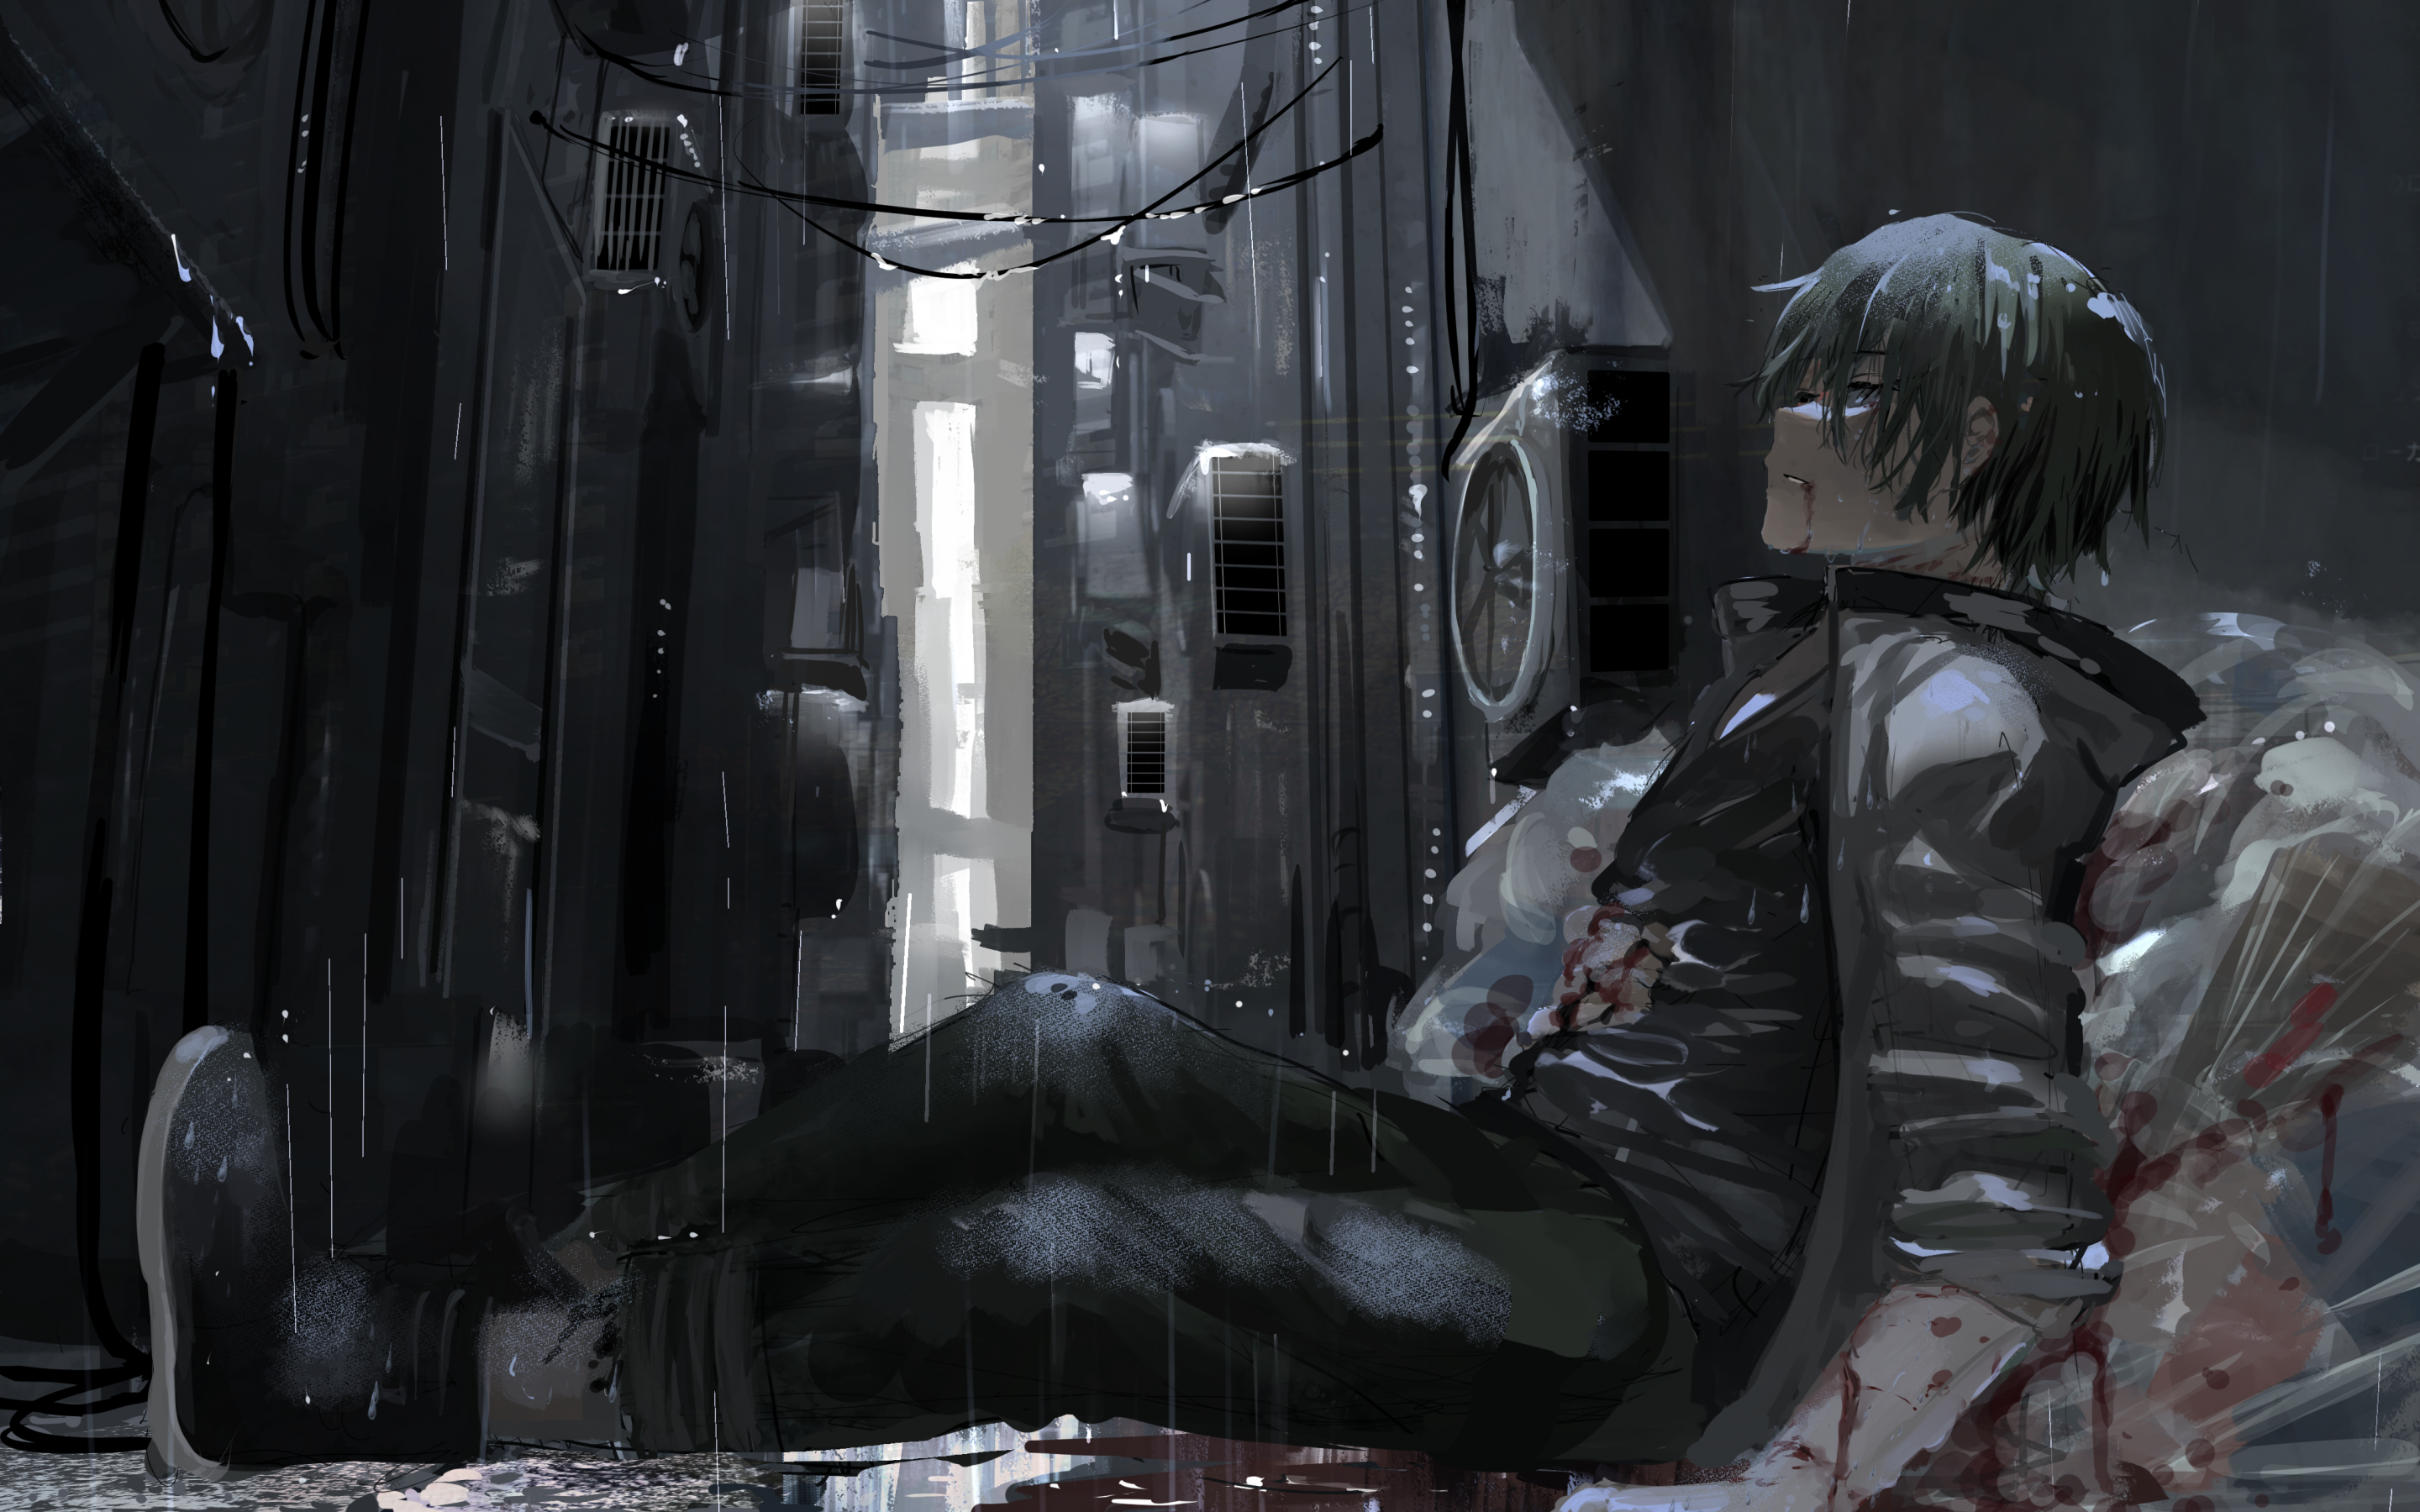 Download 2880x1800 Anime Boy, Darkness, Lonely, Raining, Sadness, After Fight Wallpaper For MacBook Pro 15 Inch